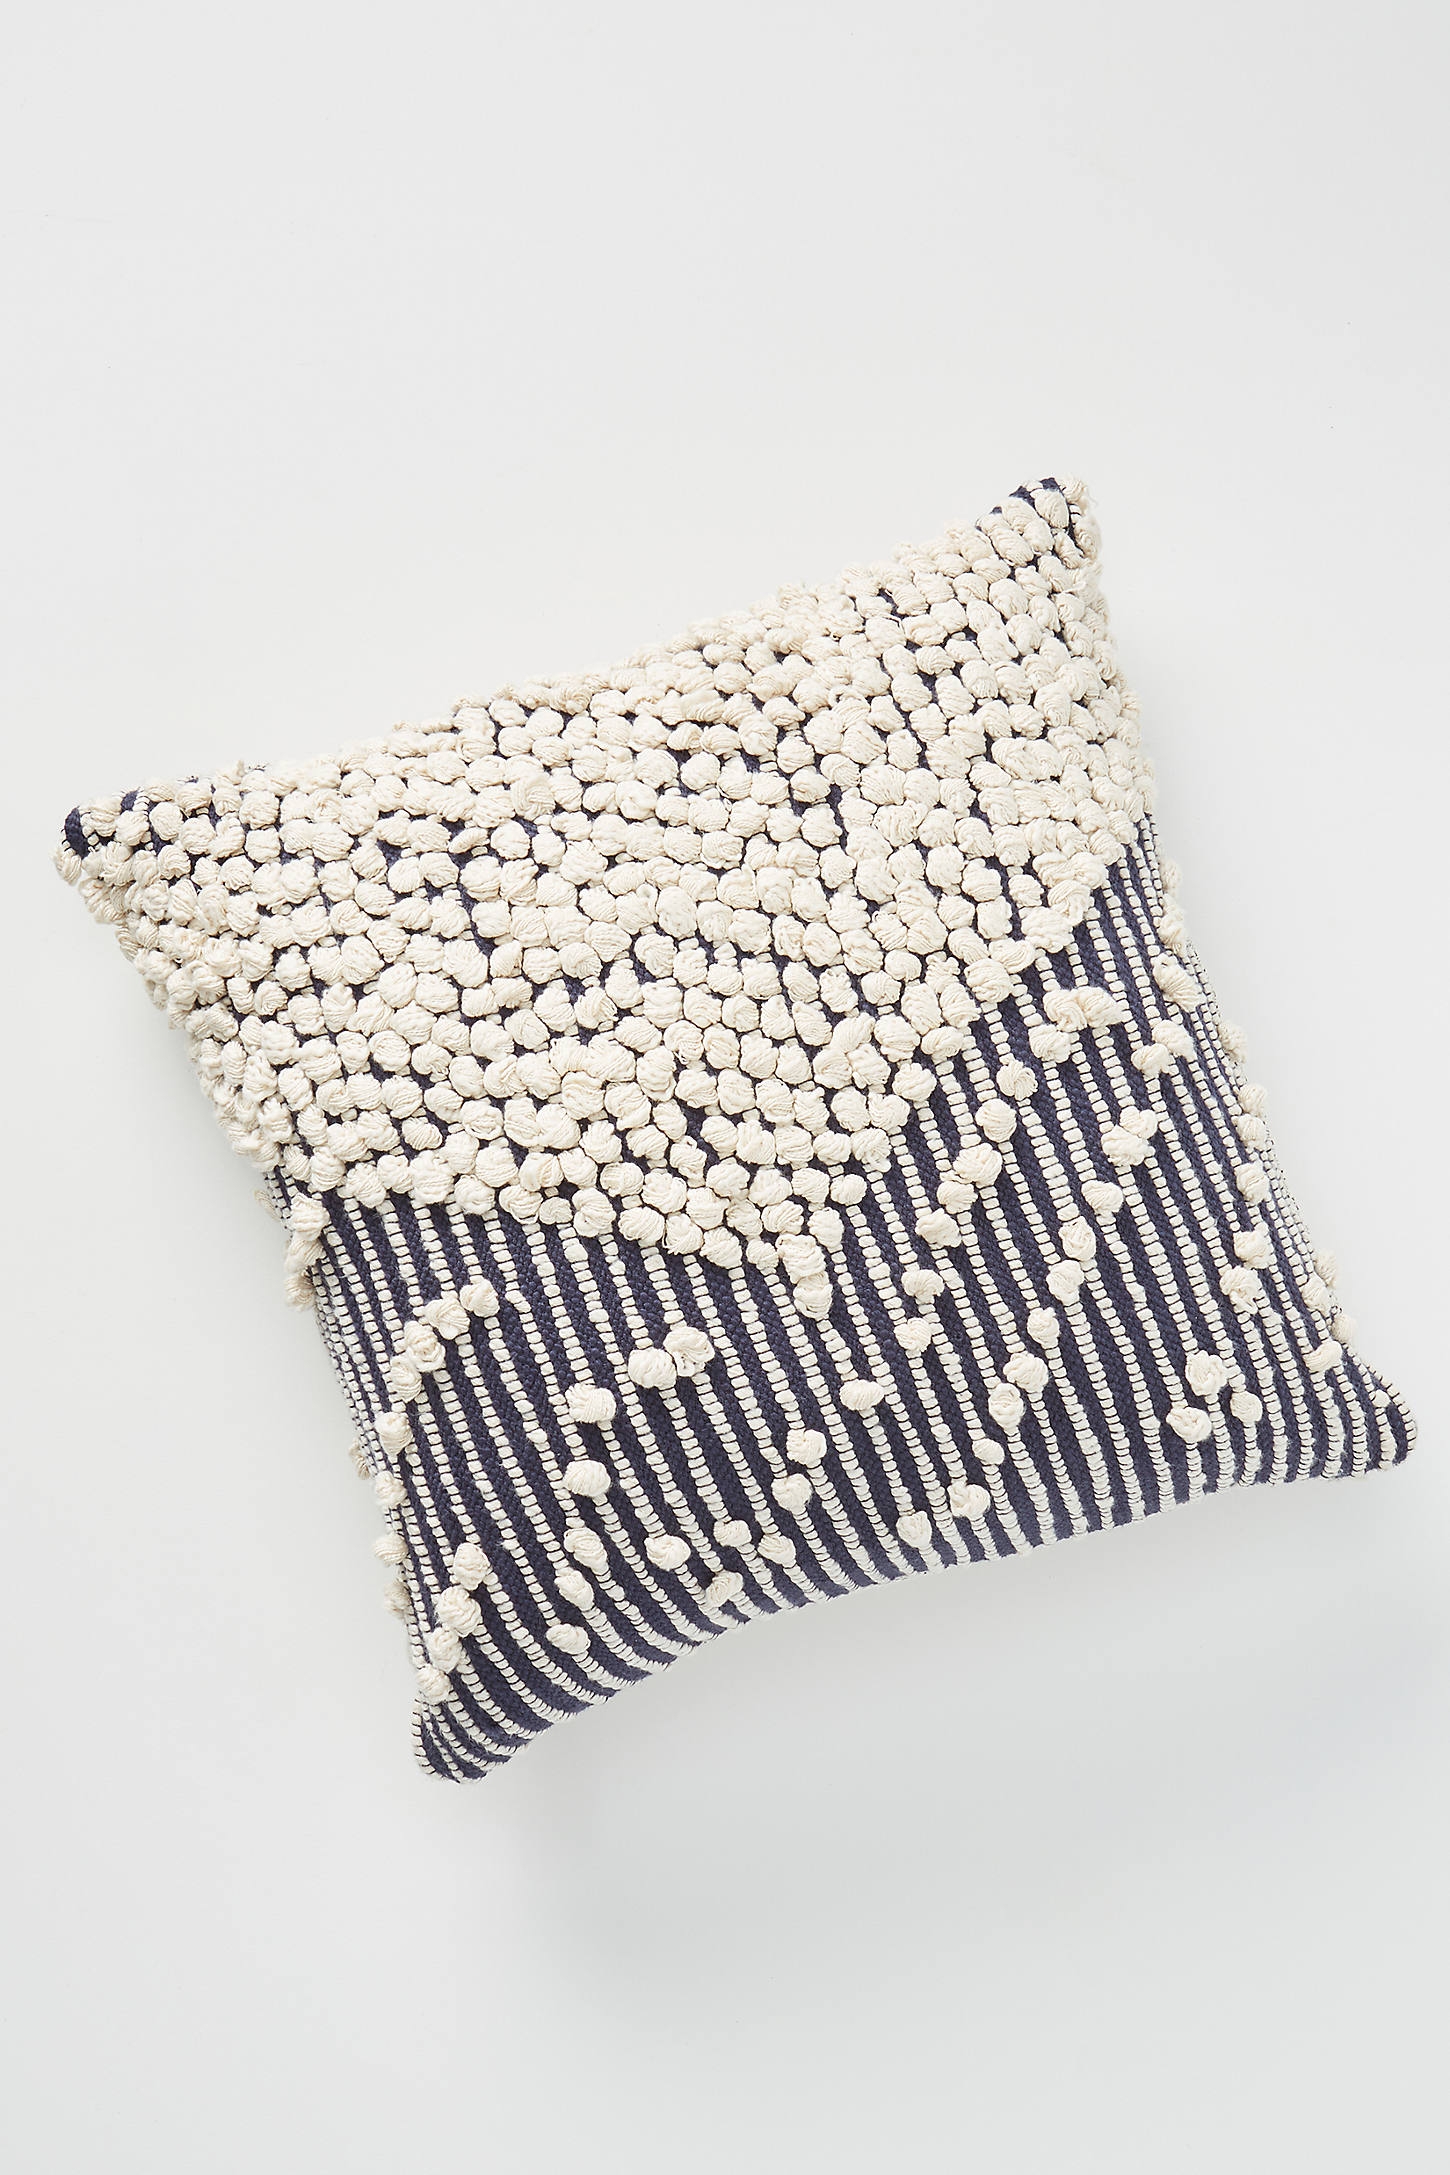 Textured Bobble Pillow - Image 0